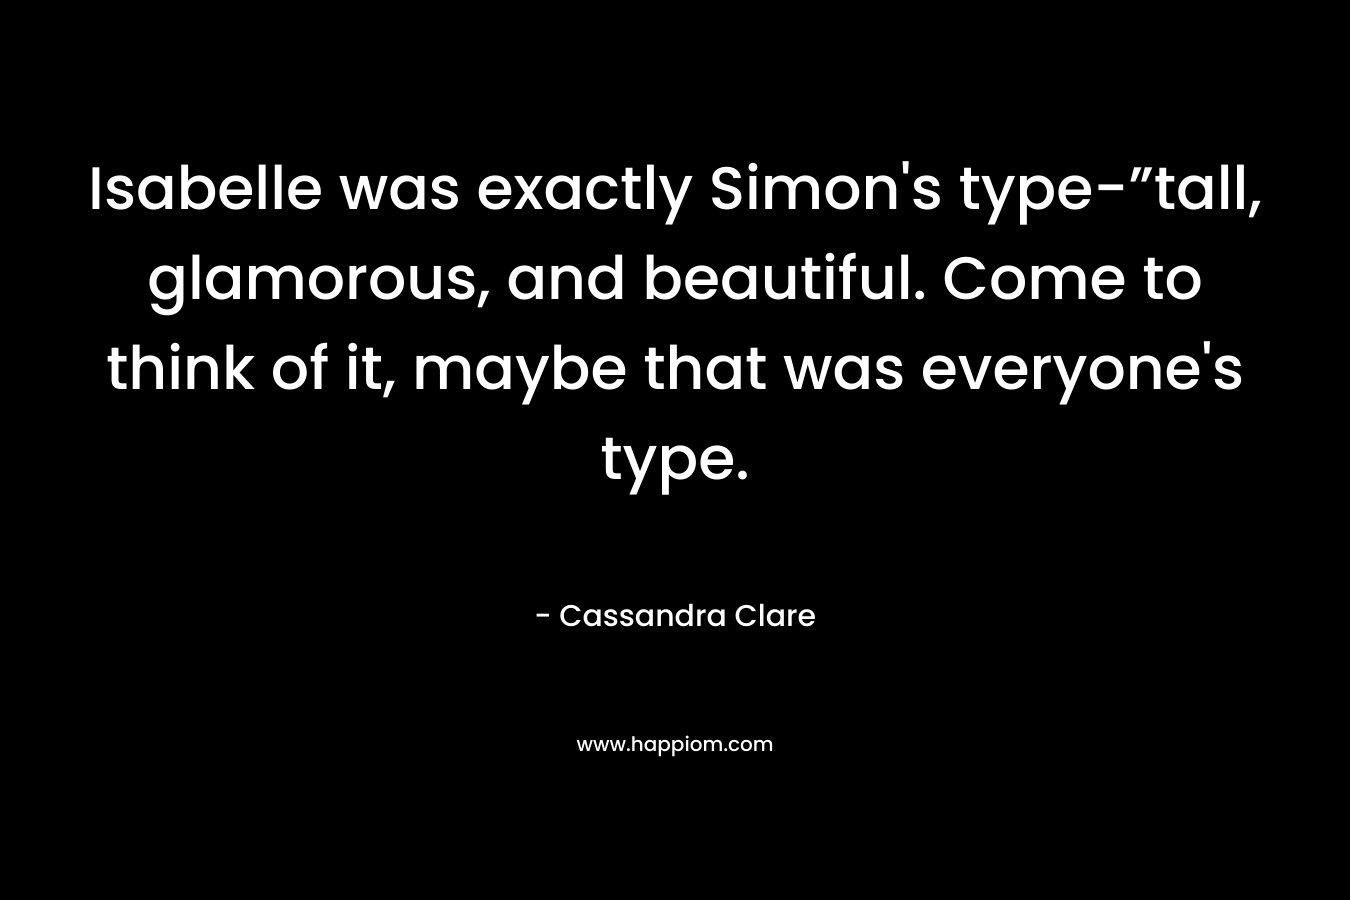 Isabelle was exactly Simon’s type-”tall, glamorous, and beautiful. Come to think of it, maybe that was everyone’s type. – Cassandra Clare